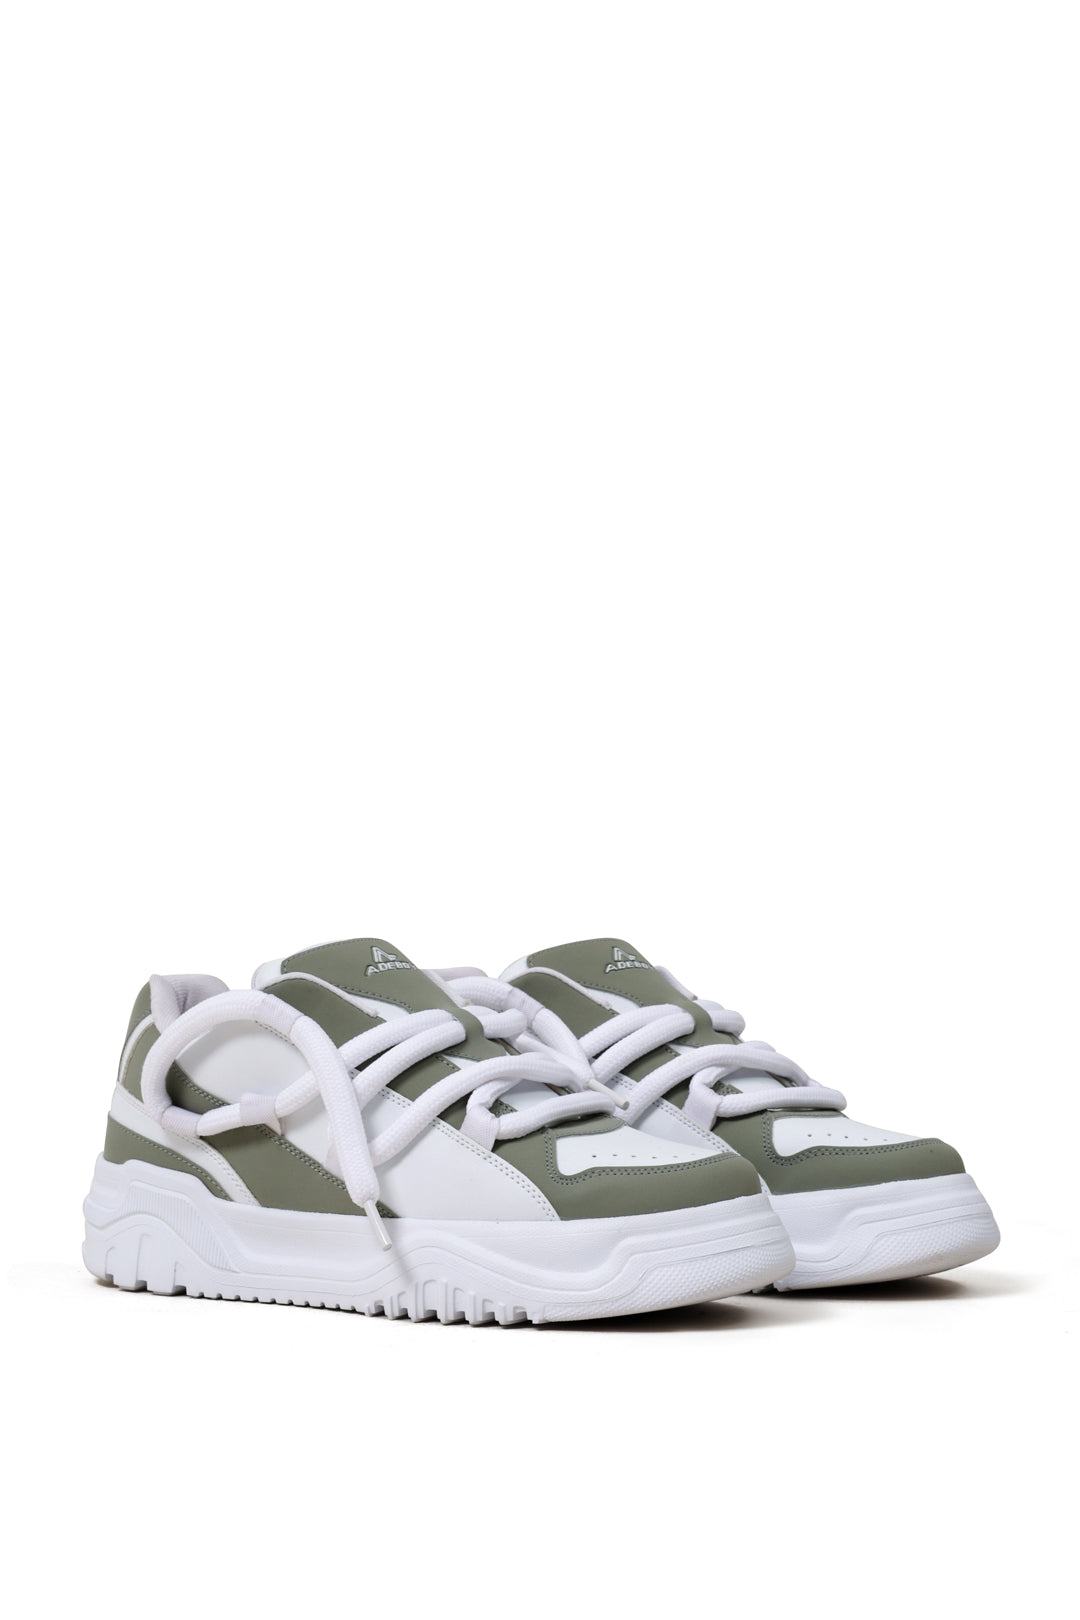 Troop Lime Green/White Low Top Trainer